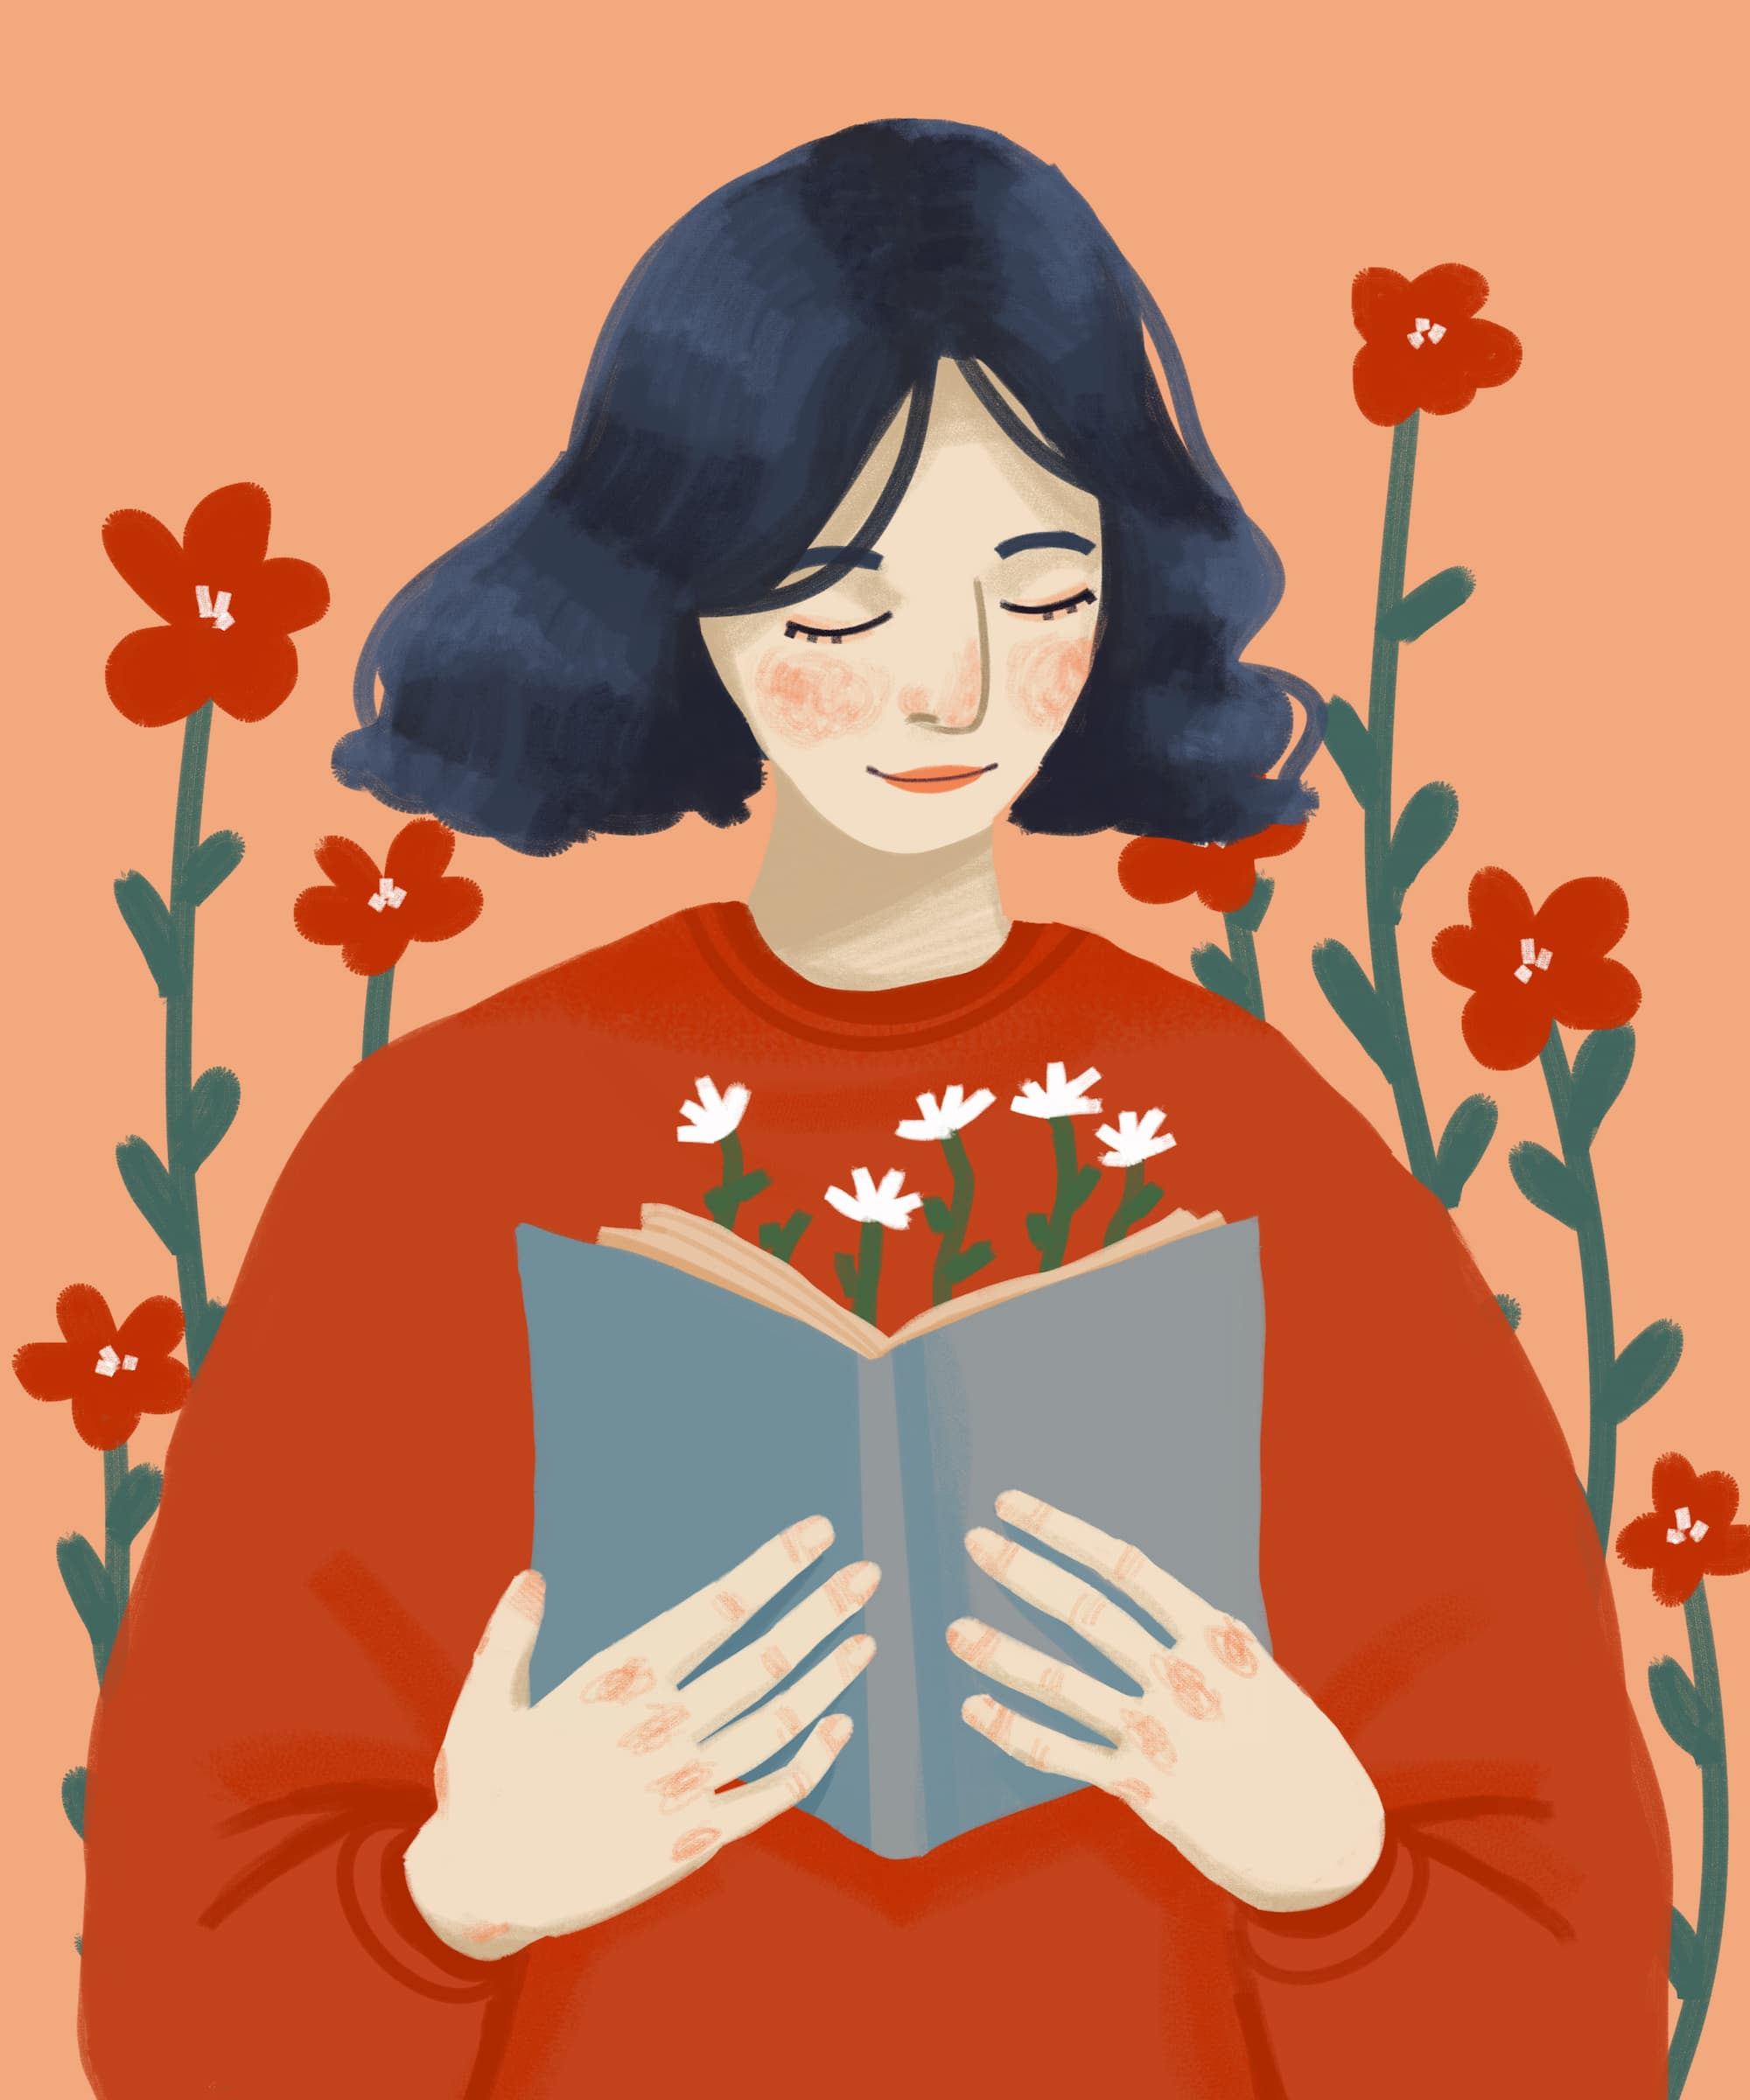 Illustration Of A Woman Reading A Book With Flowers In The Background.